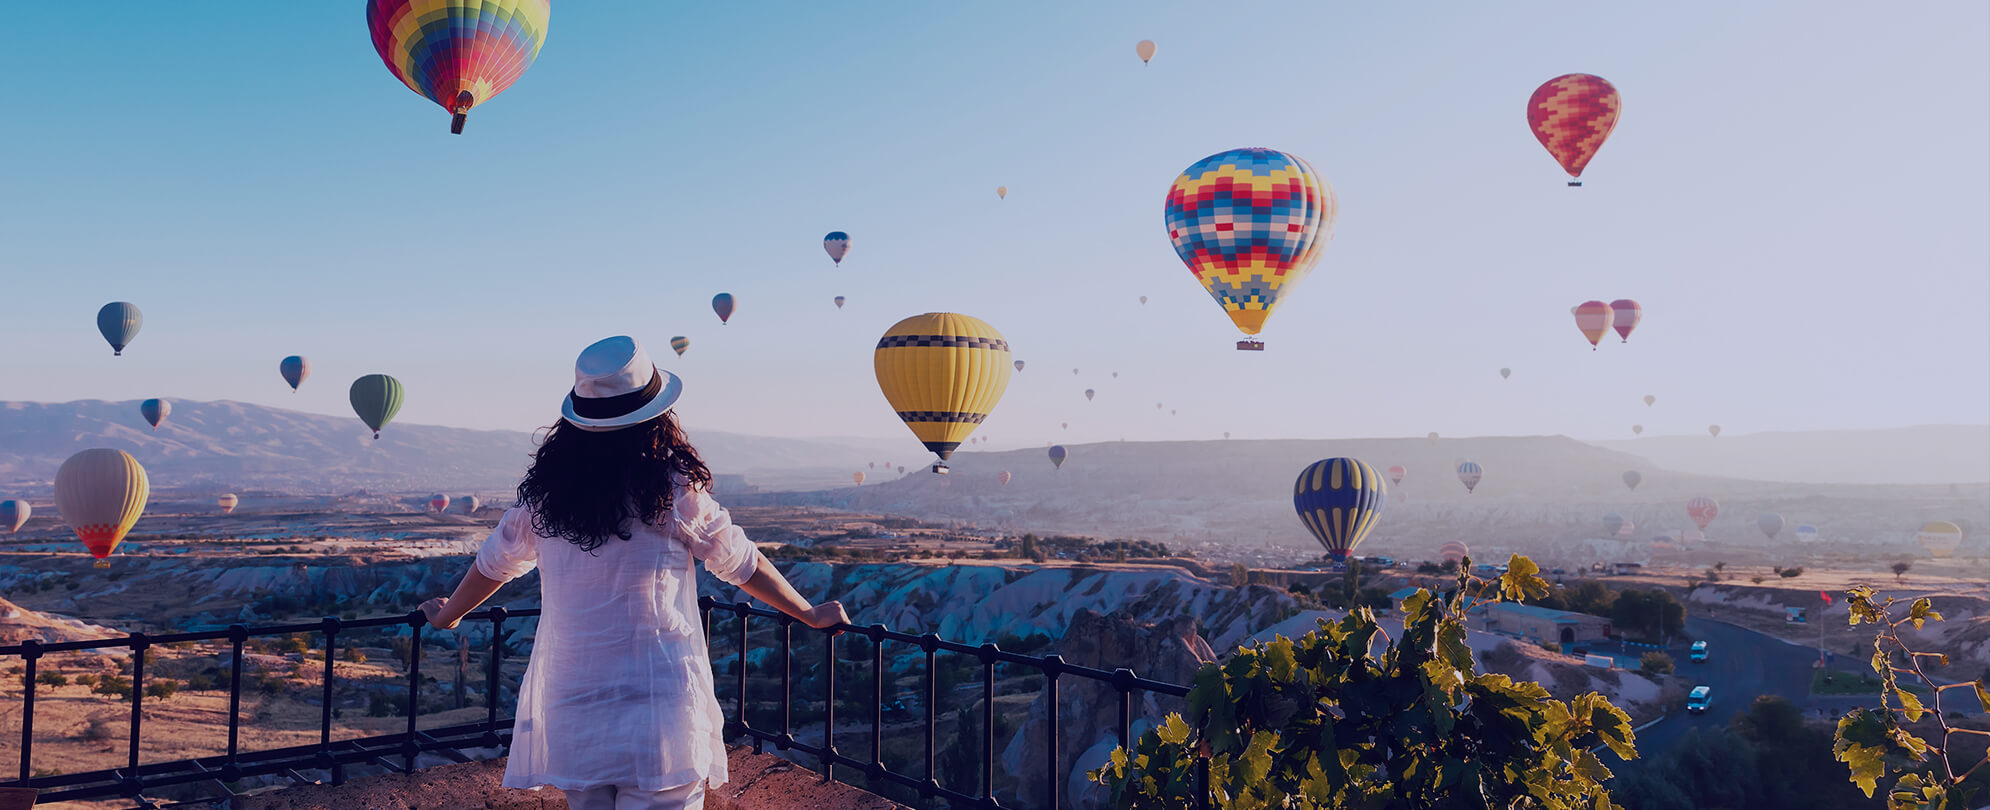 Woman in hat looking at hot airballoons